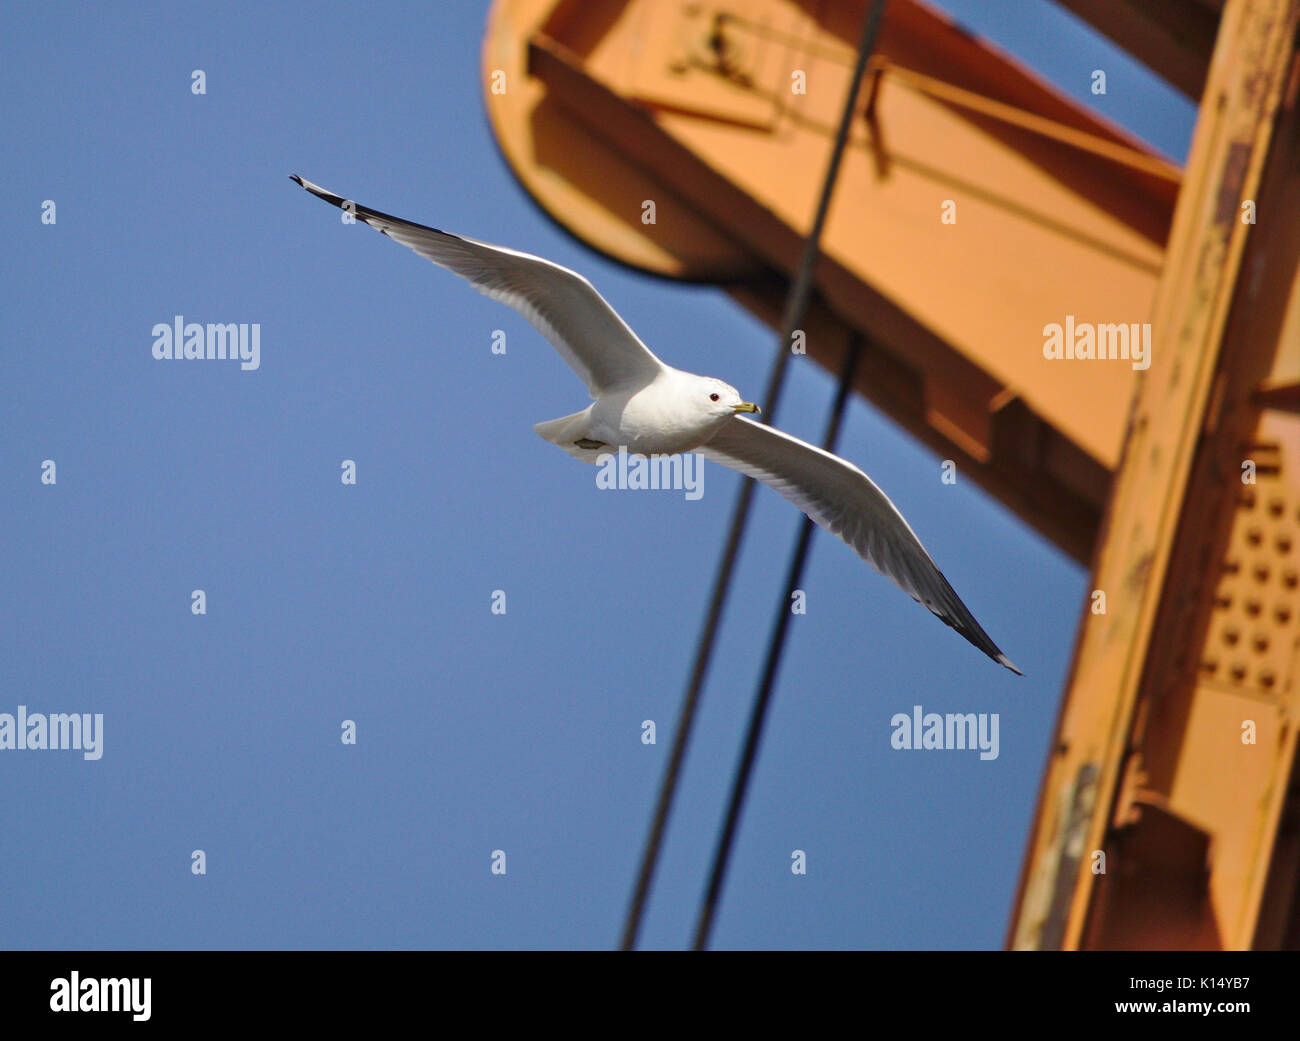 Common gull and orange crane in front of a blue sky Stock Photo